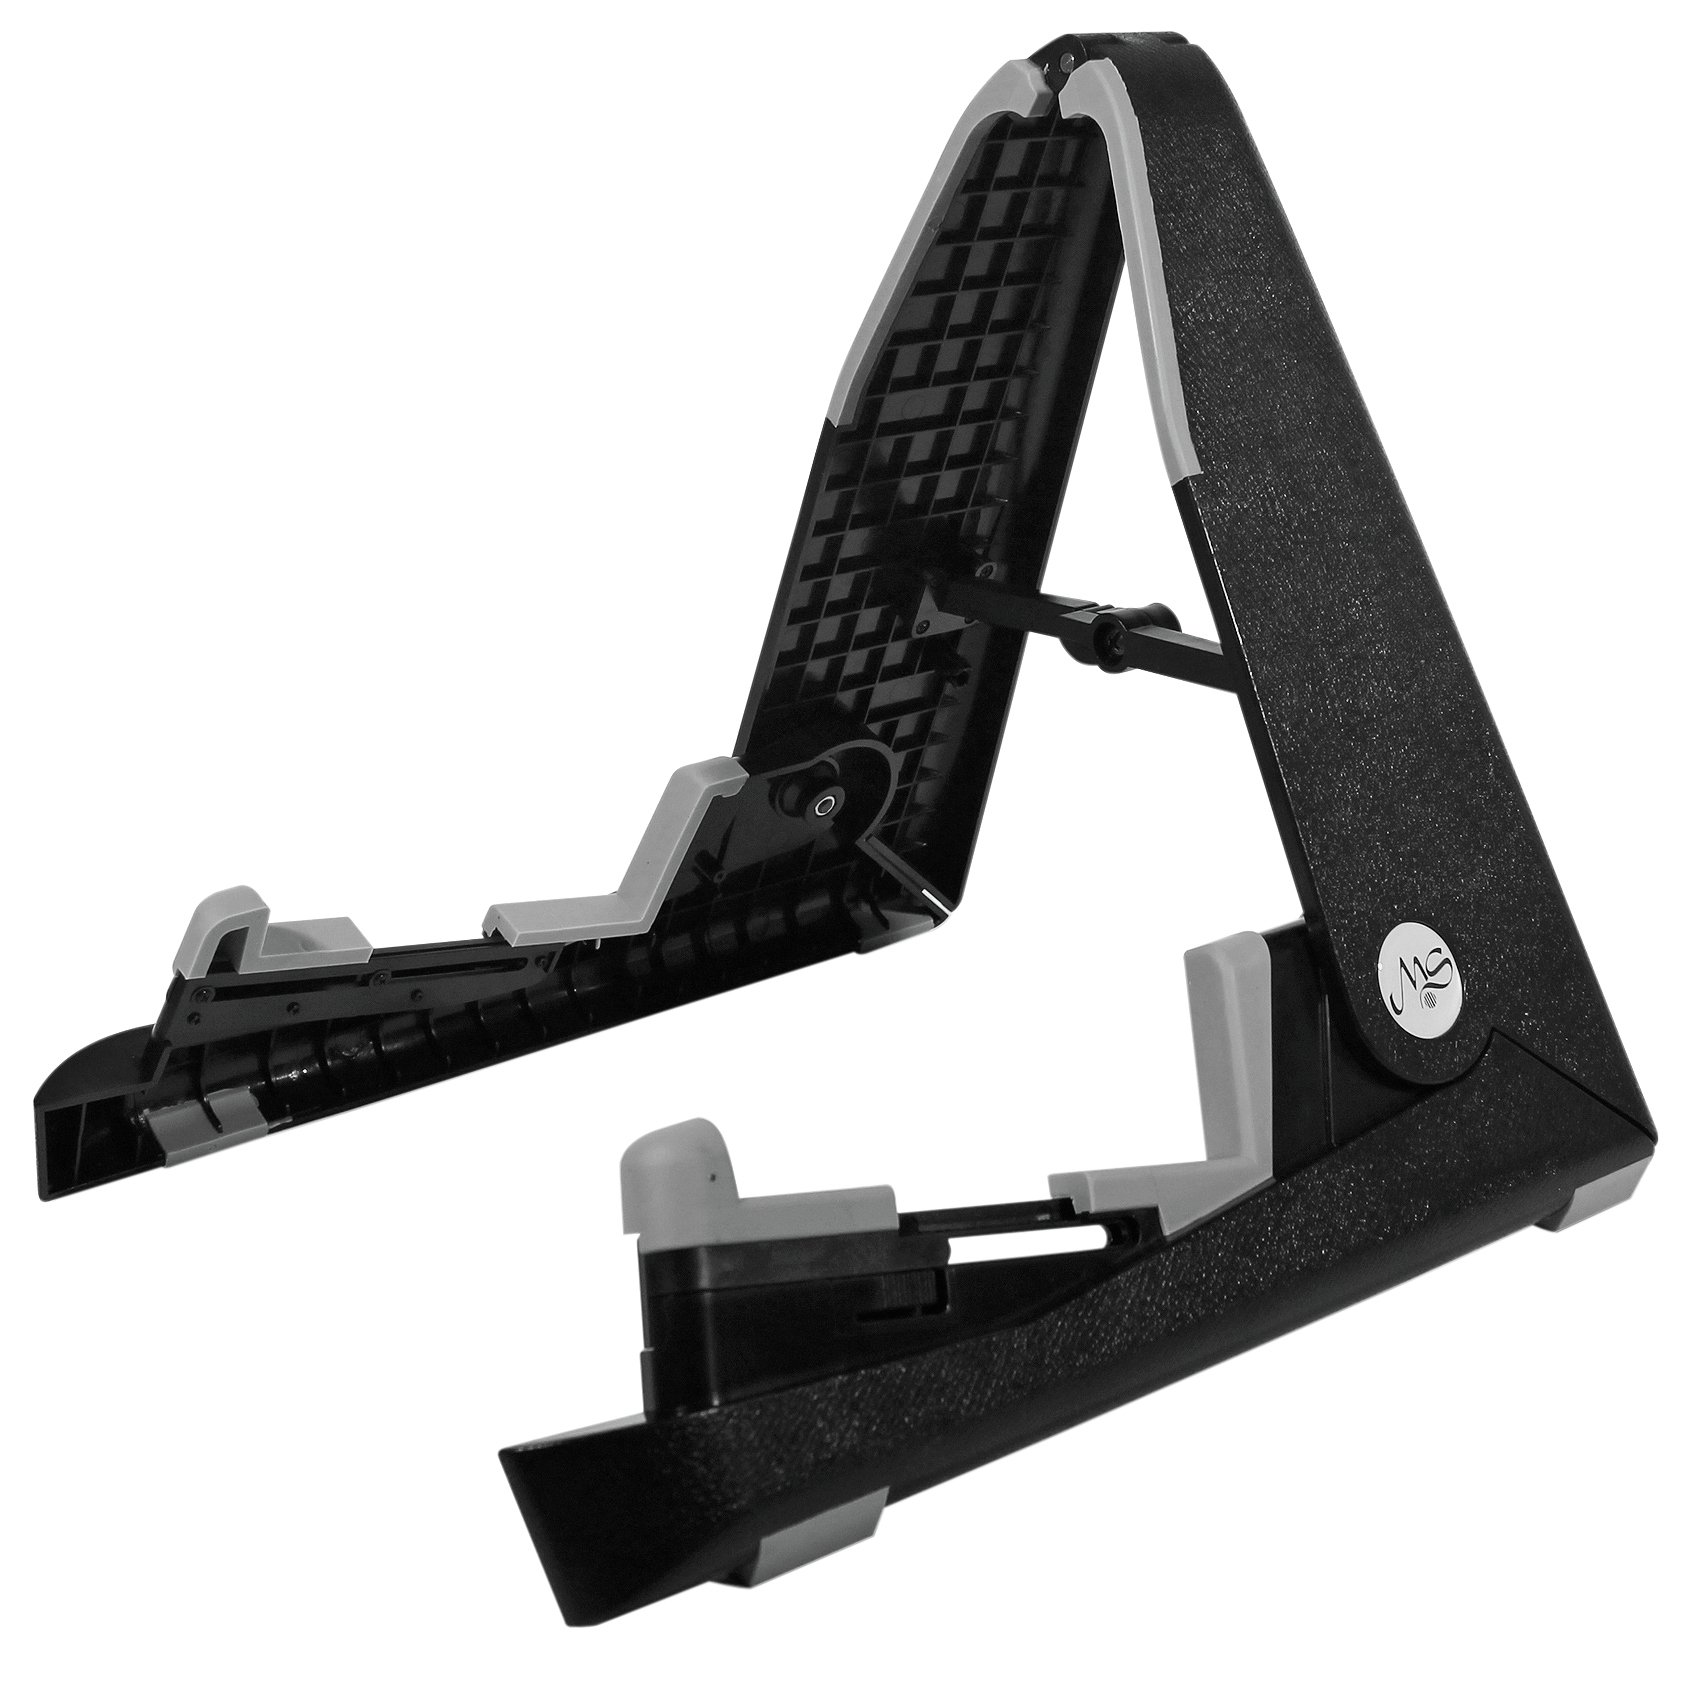 Martin Smith Foldaway Guitar Stand Review